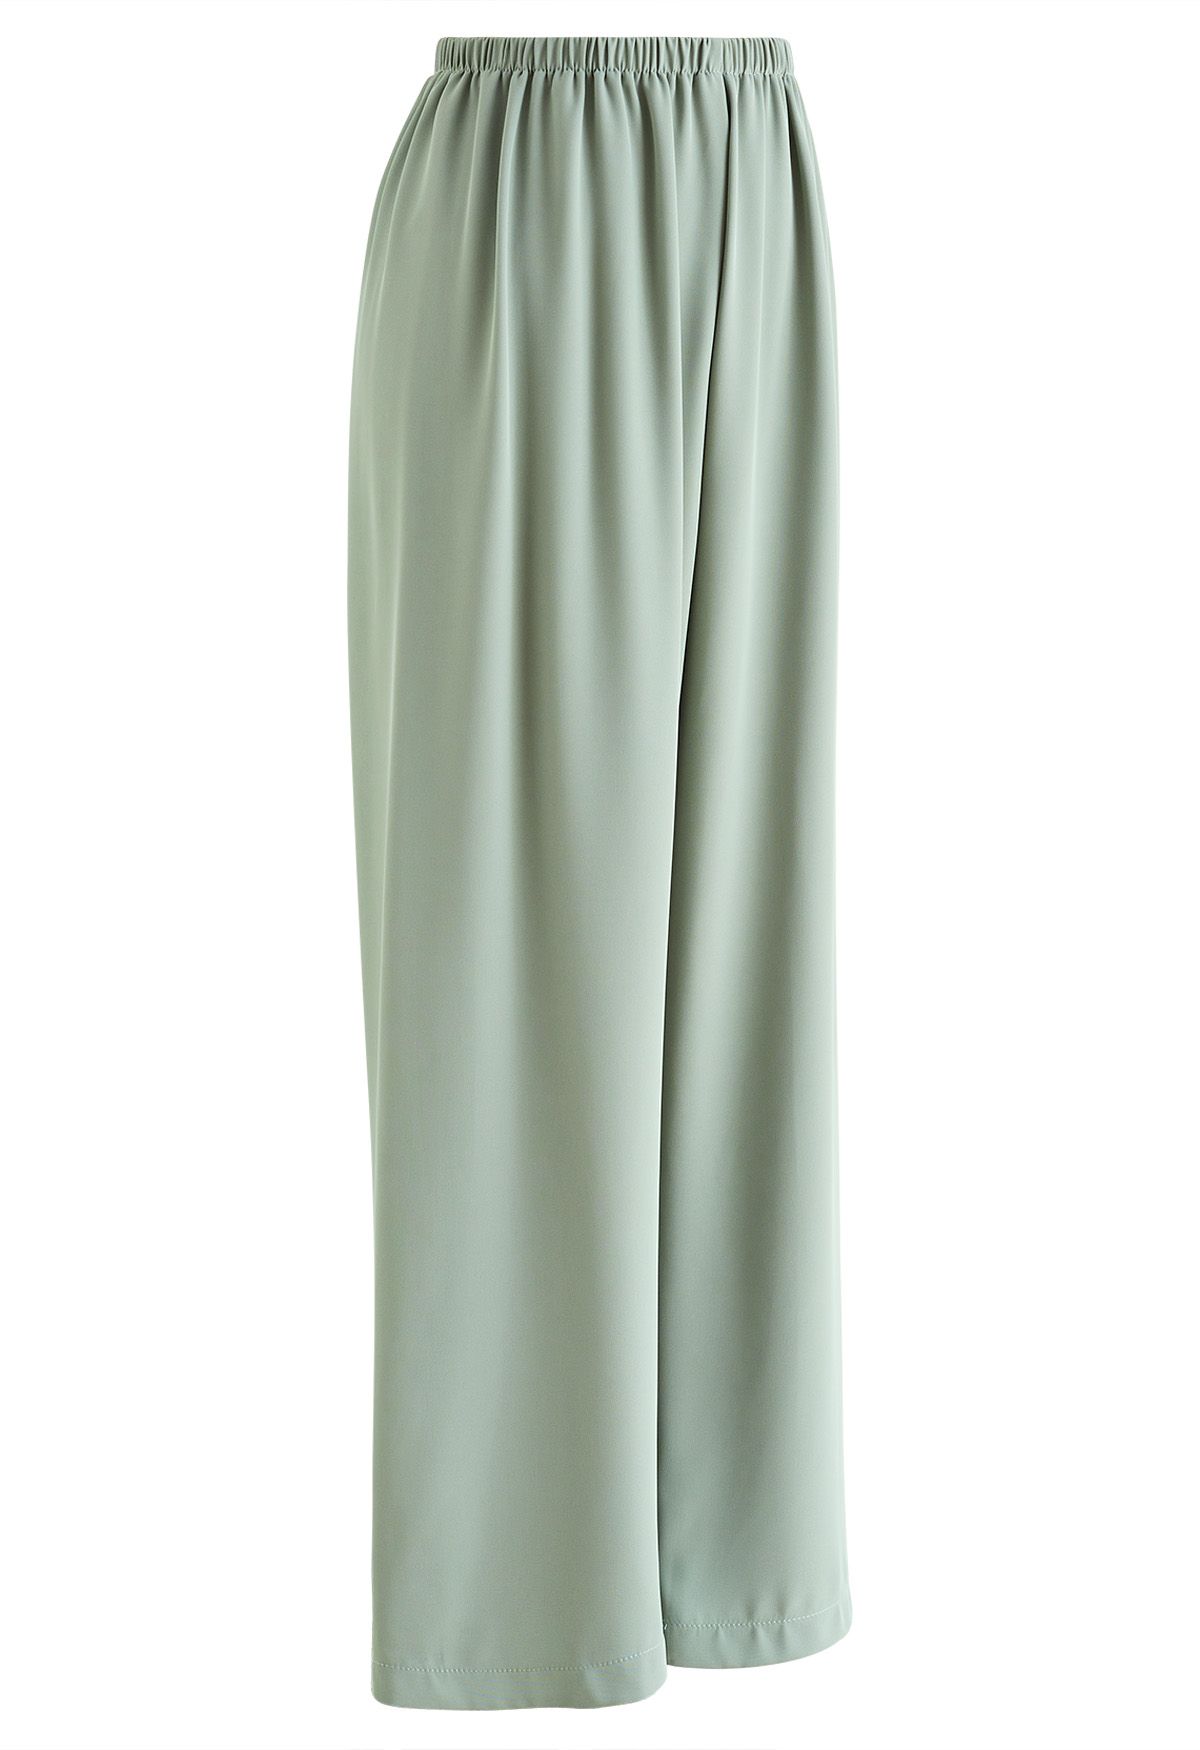 Smooth Satin Pull-On Pants in Pea Green